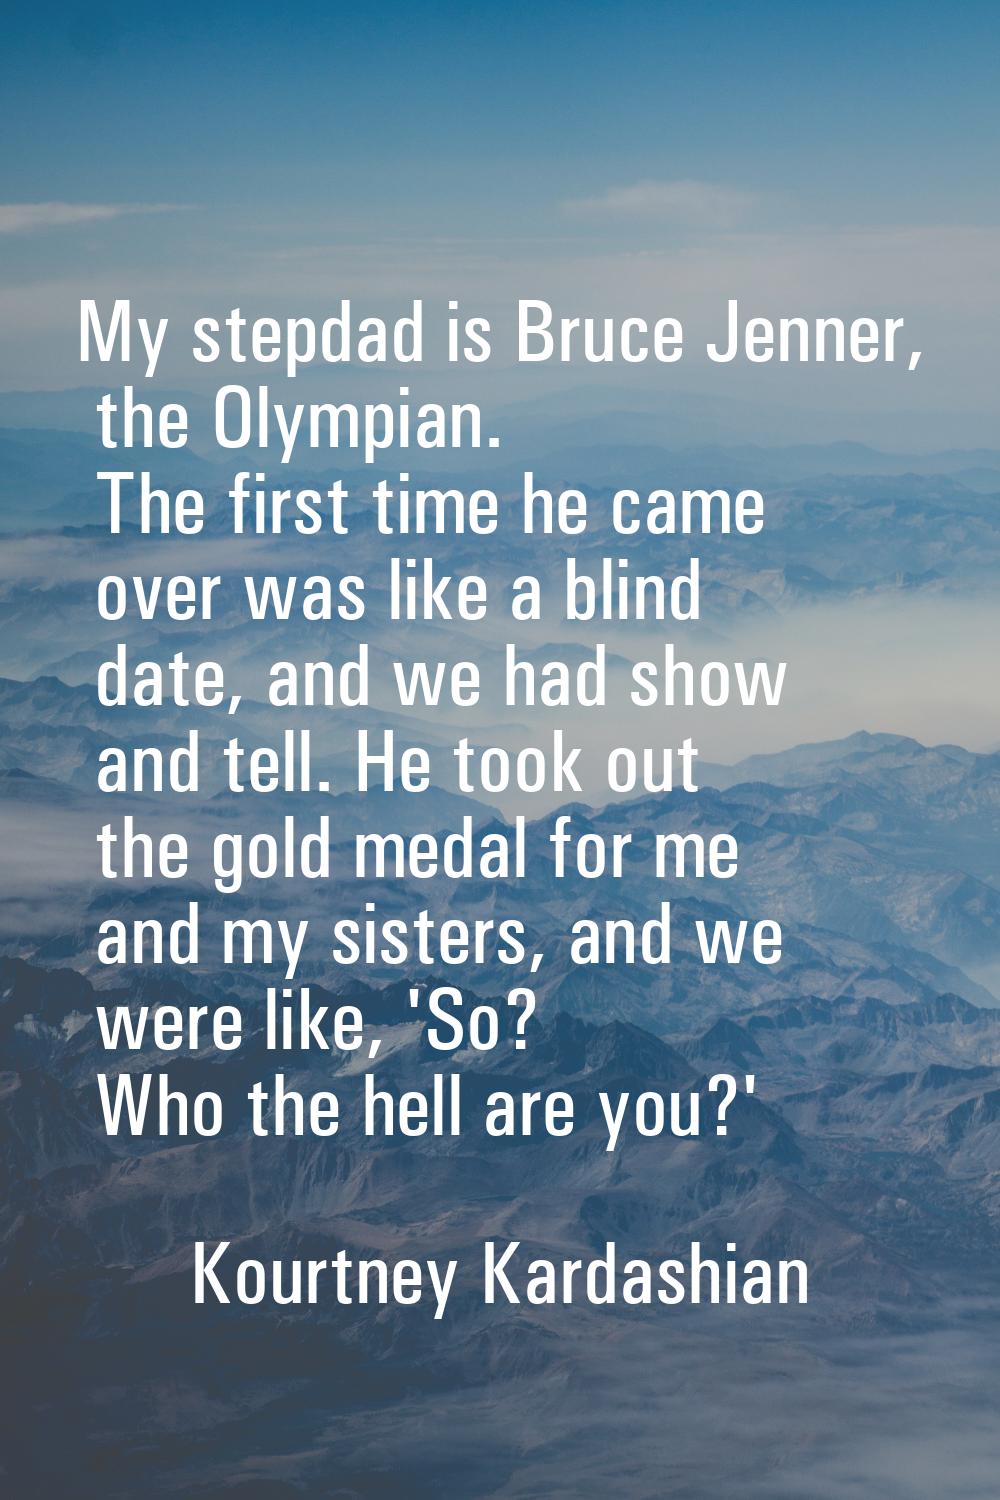 My stepdad is Bruce Jenner, the Olympian. The first time he came over was like a blind date, and we